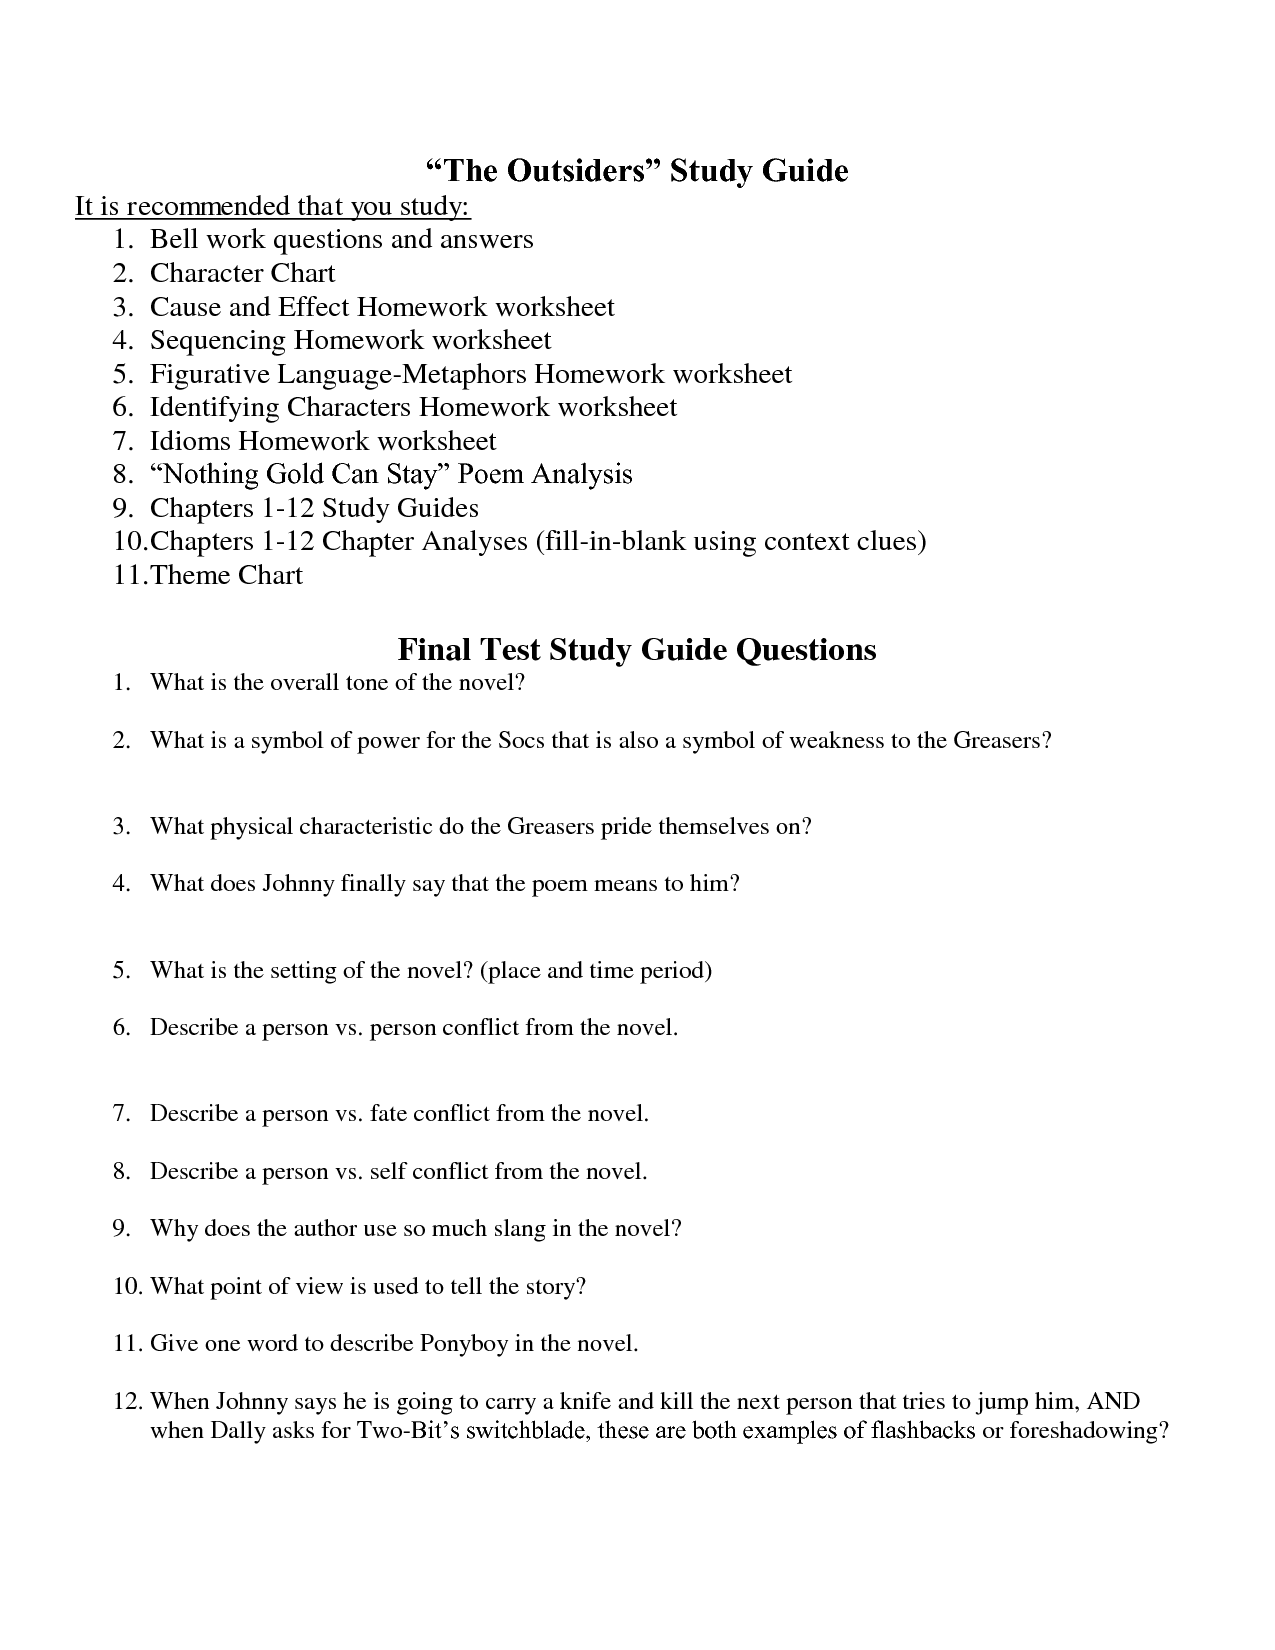 worksheet-7-commissions-answers-free-download-gambr-co